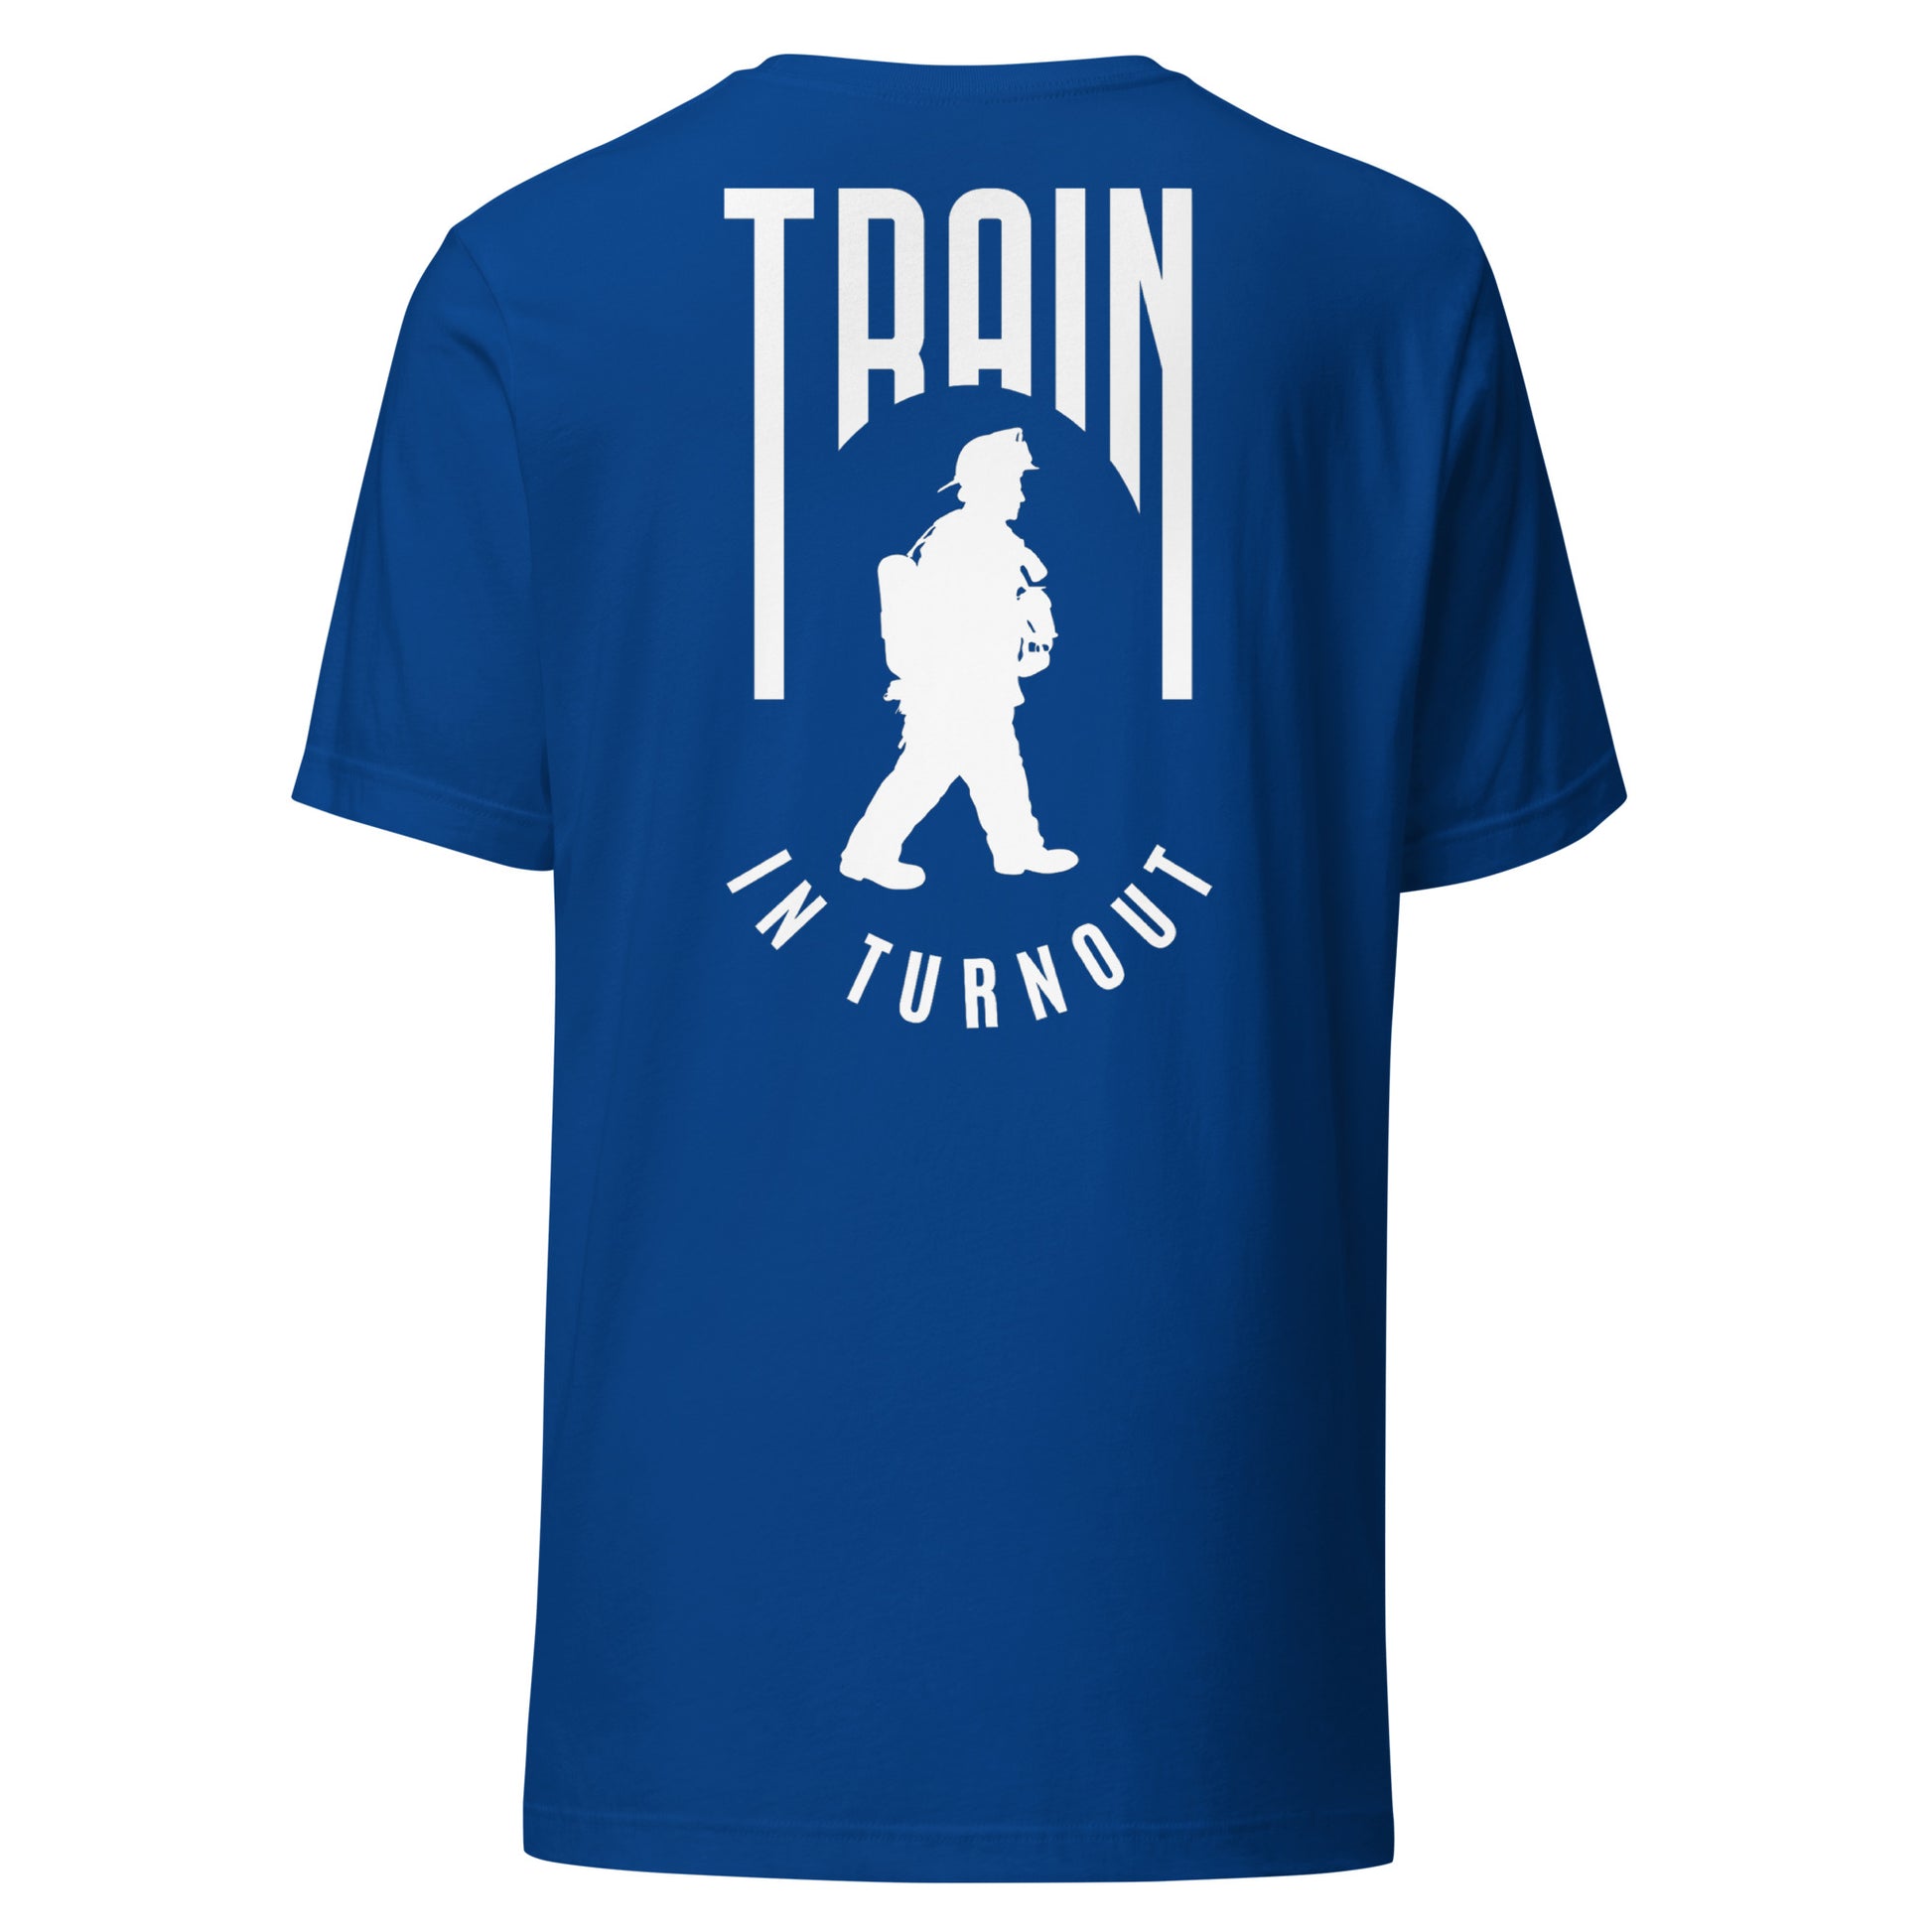 Train in Turnout Graphic Firefighter shirt, royal blue and white.  